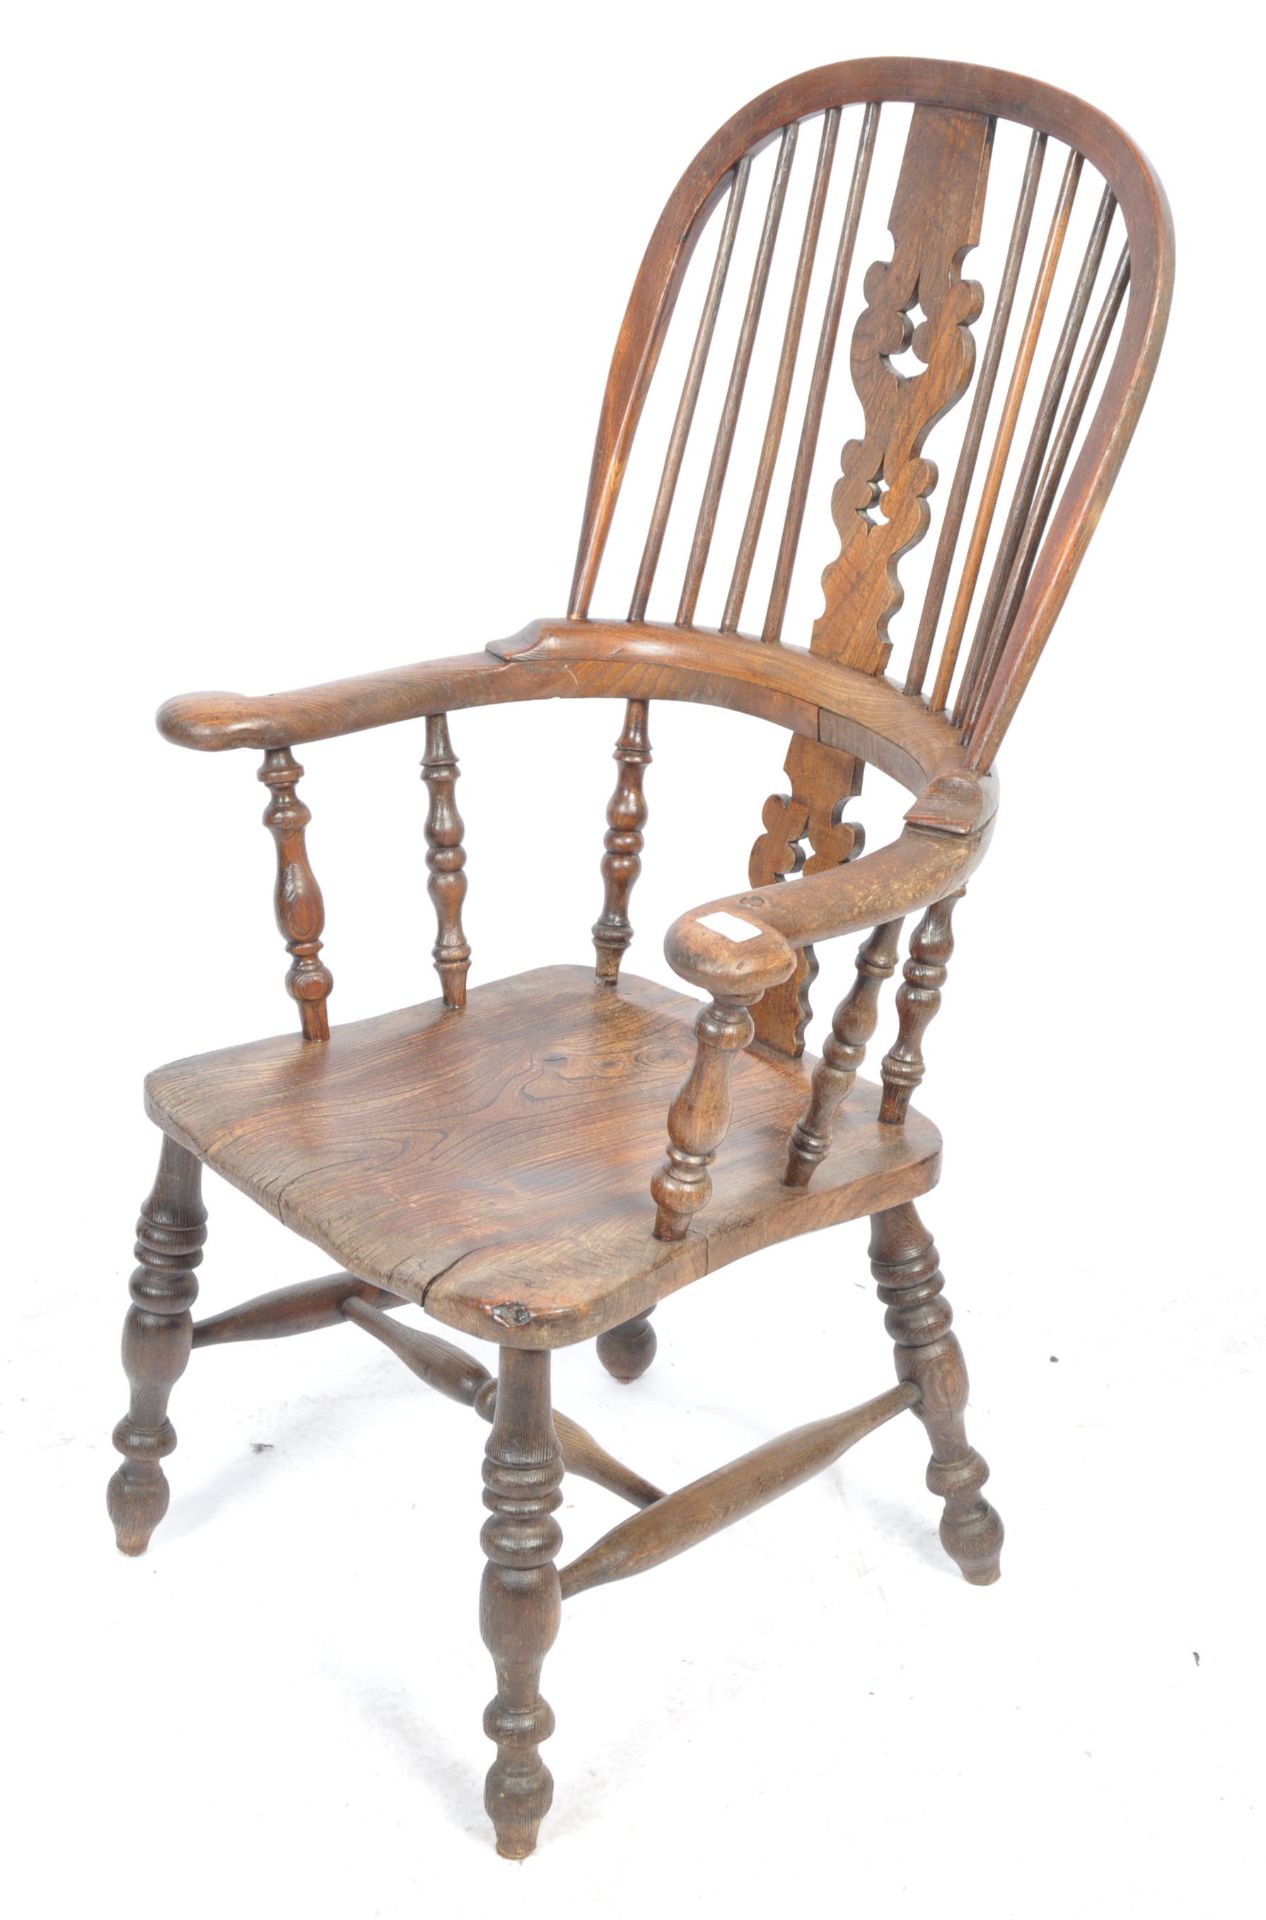 19TH CENTURY ENGLISH ANTIQUE YEW WOOD WINDSOR CARVER CHAIR - Image 2 of 6